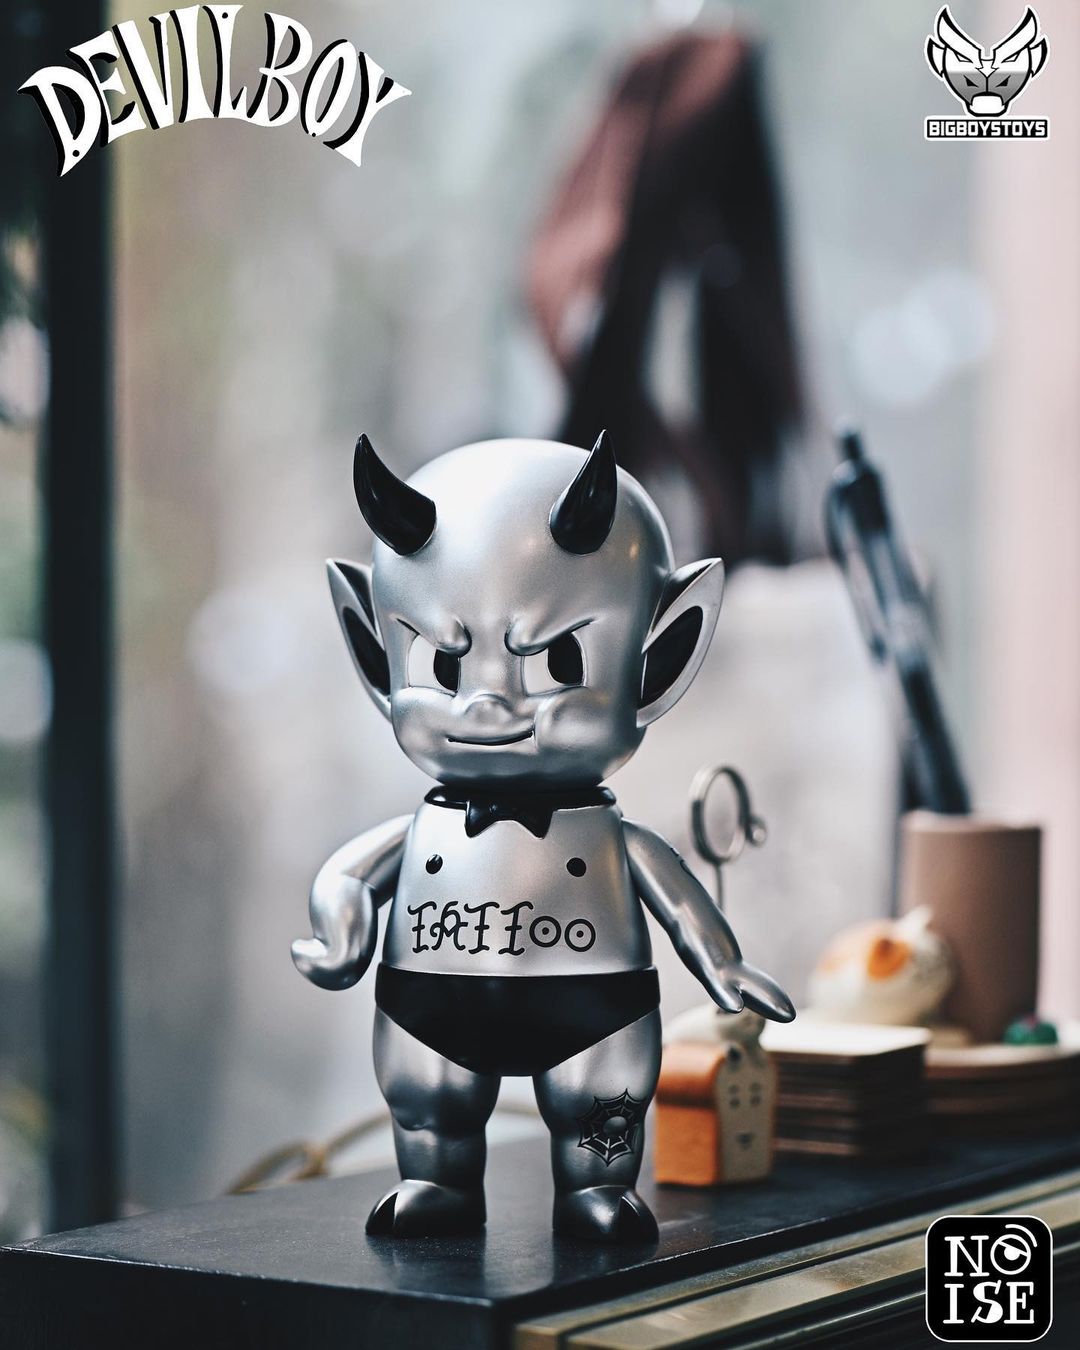 The Devil Boy Noise x Bigboystoys - The Toy Chronicle